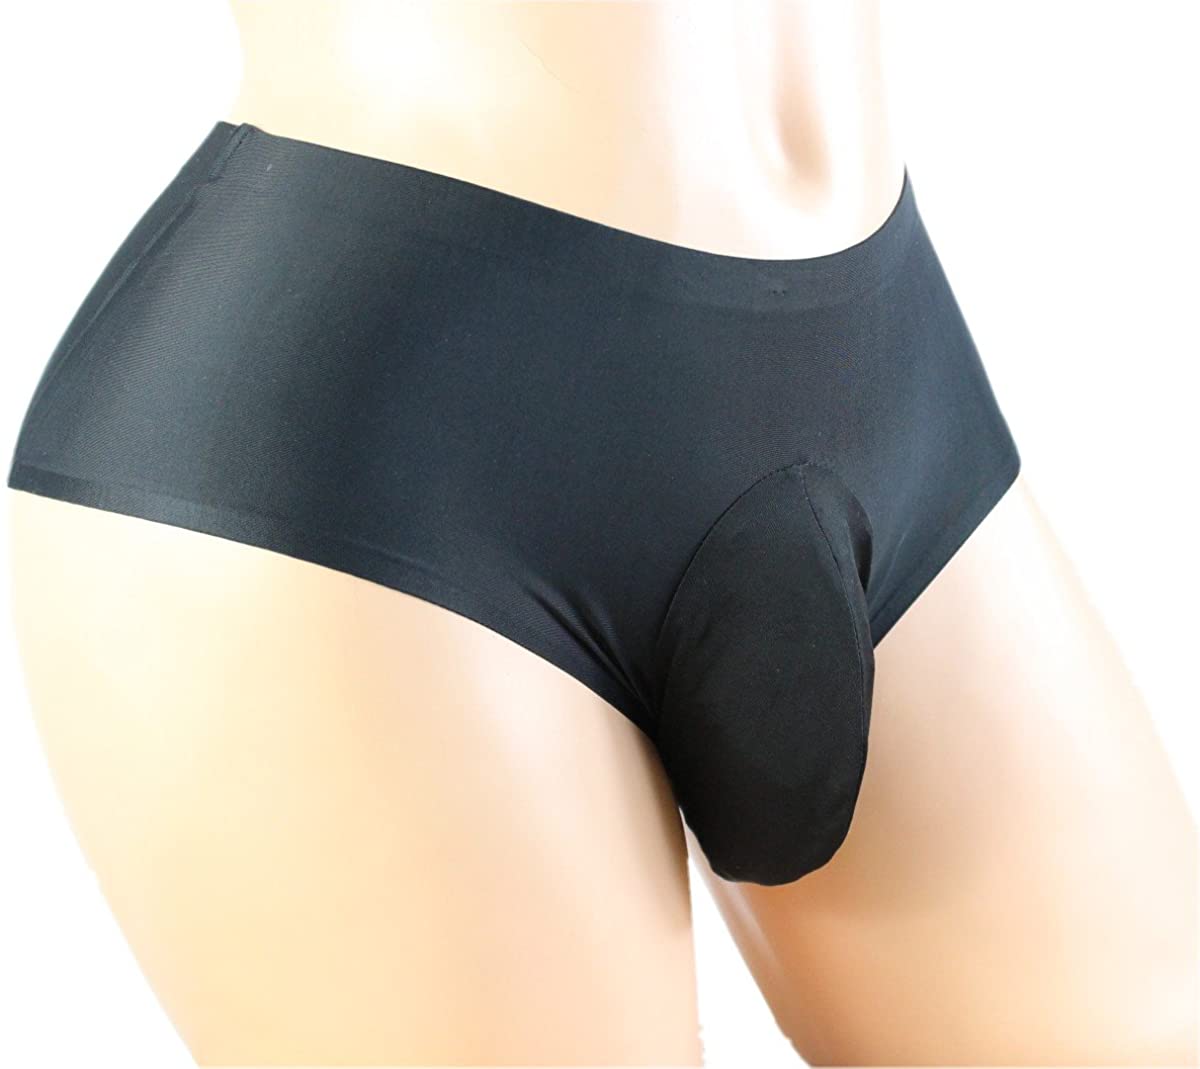 Buy affordable smooth hipster sissy pouch panties for men online